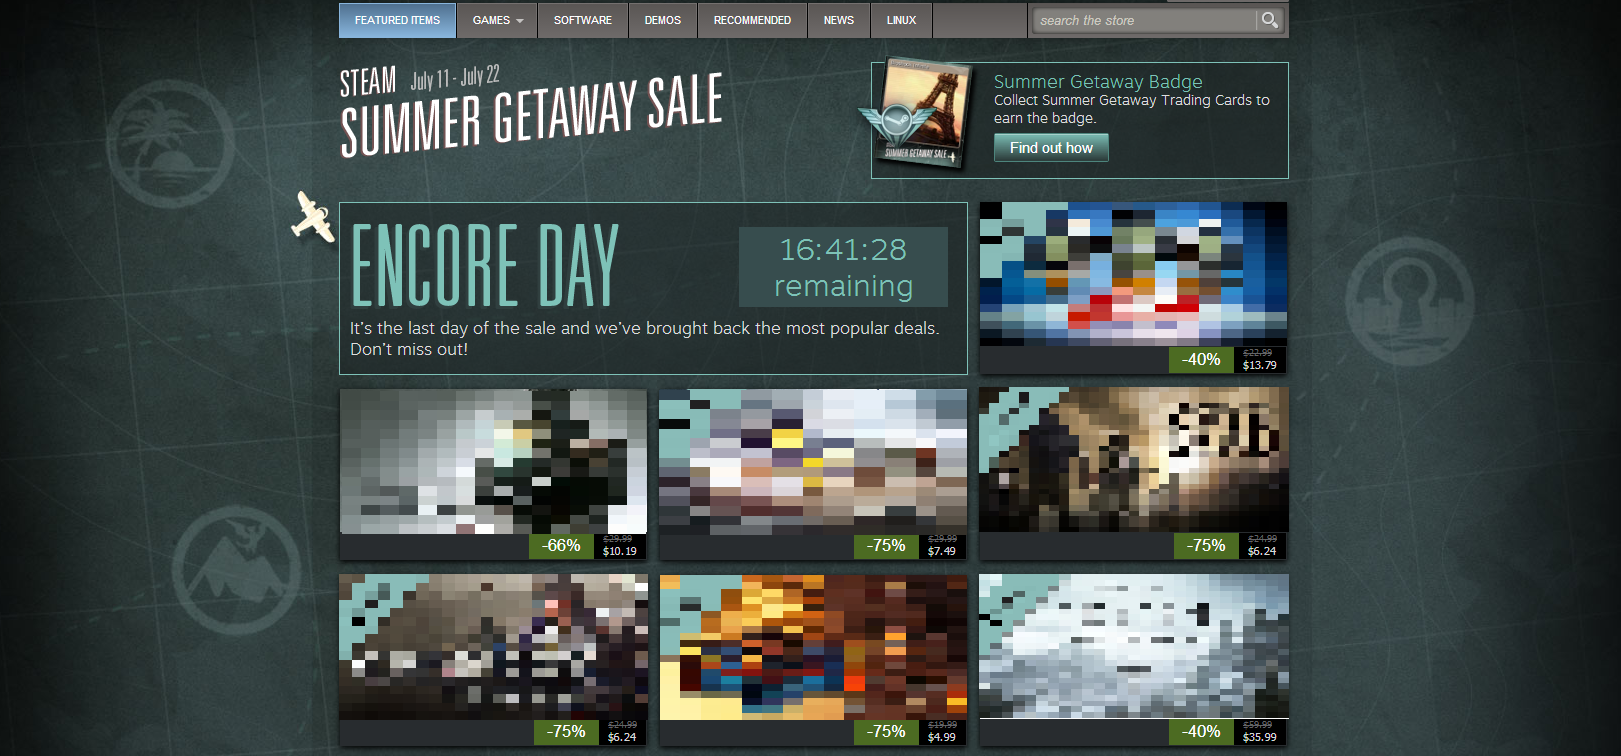 Are You Ready for a Miracle? - The 2013 Summer Steam Sale, and the Way of Things